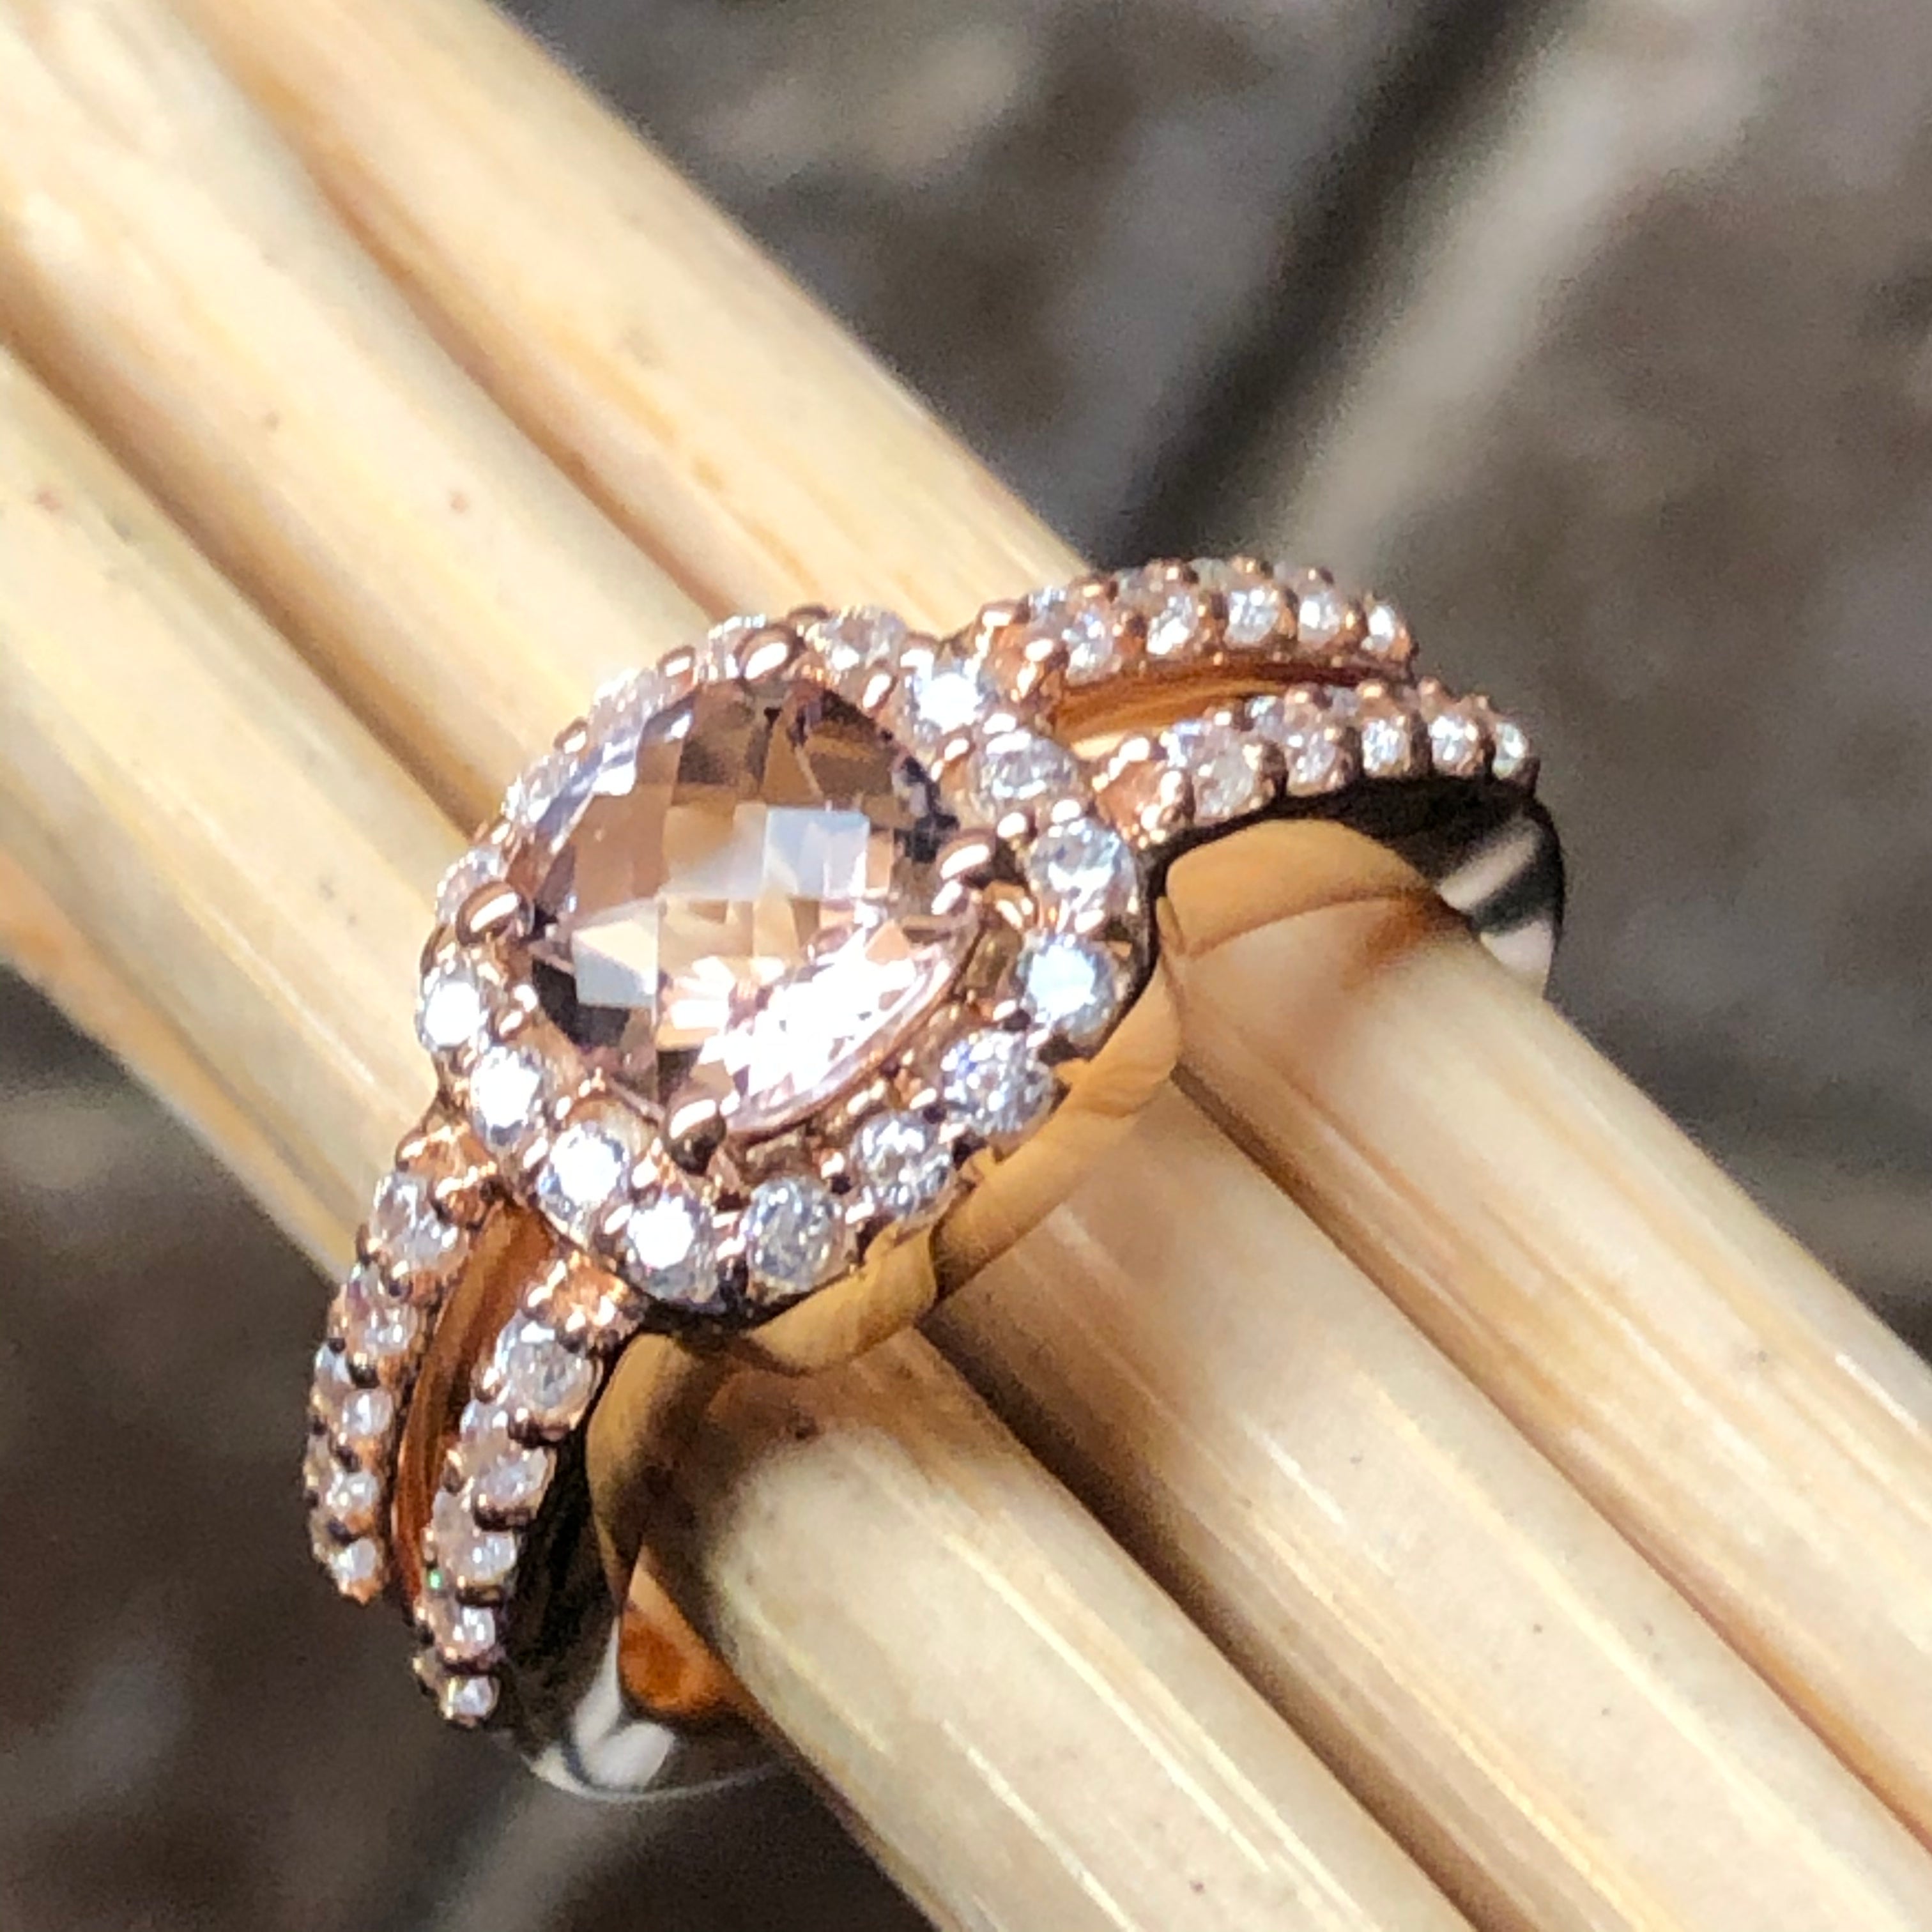 Natural 1.25ct Peach Morganite 14k Rose Gold Over Sterling Silver Engagement Ring Size 6, 7, 8, 9 - Natural Rocks by Kala